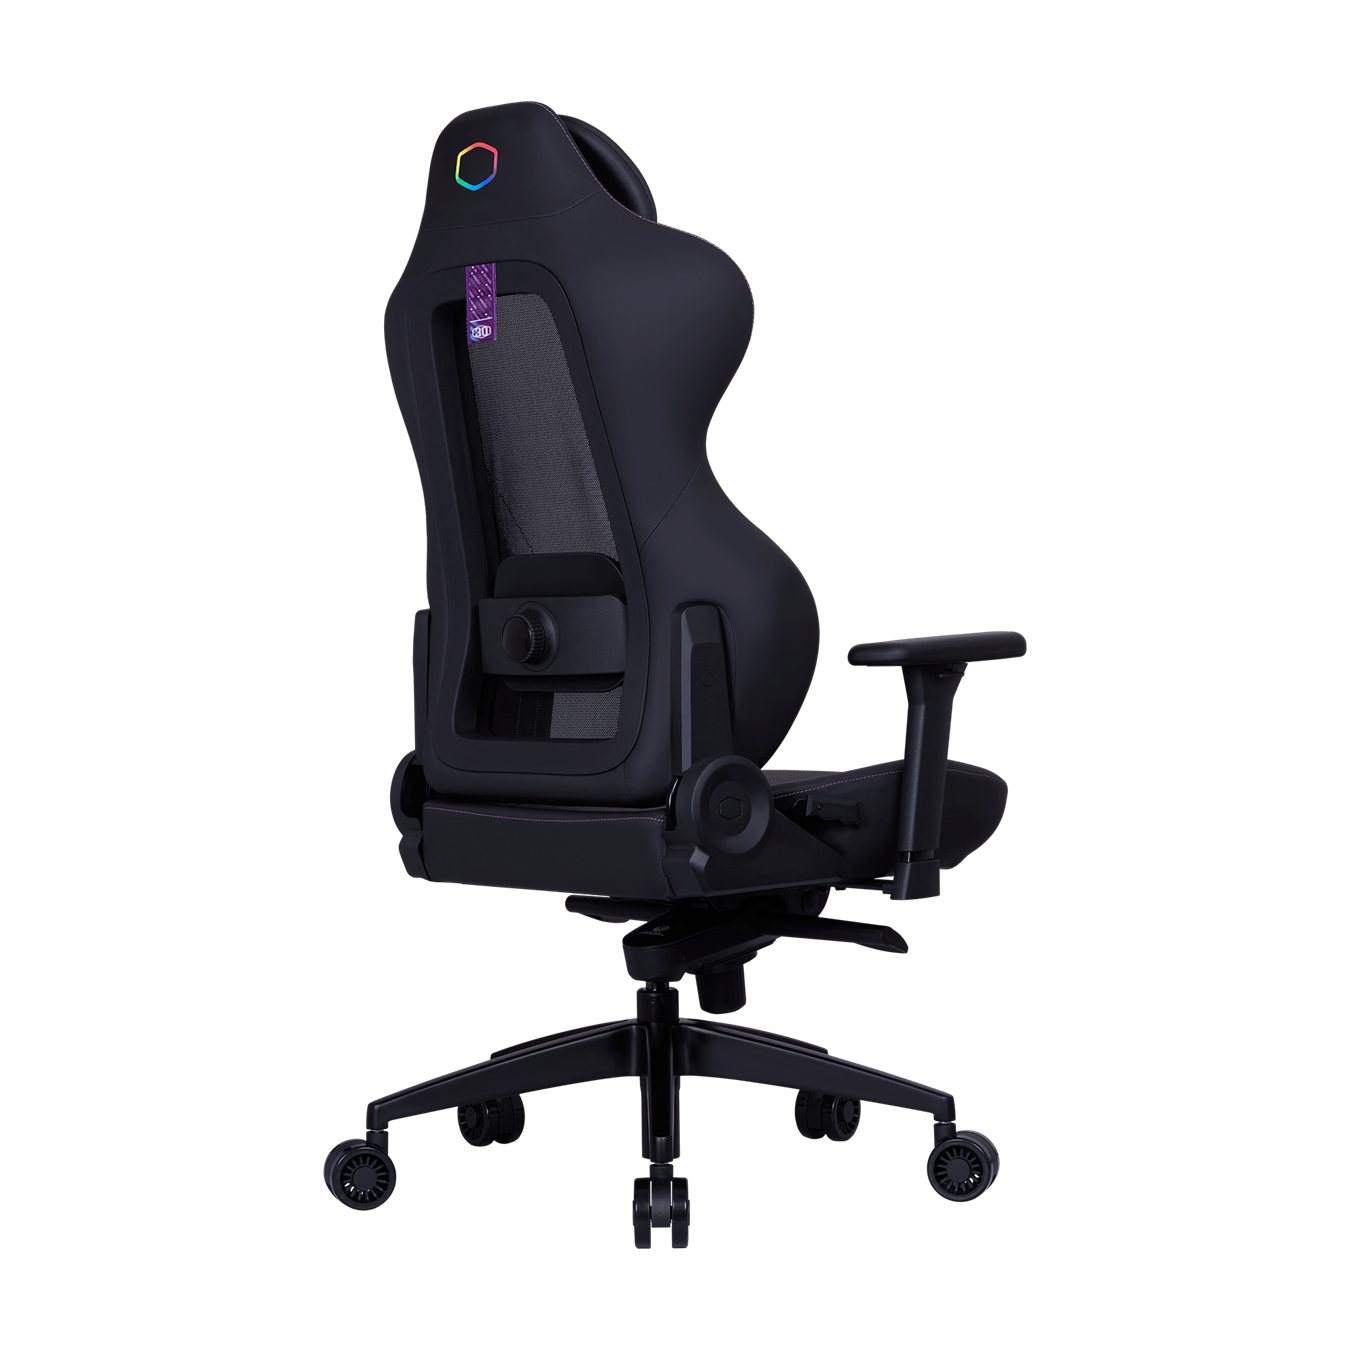 Hybrid 1 Ergo-Gaming Chair 30th Anniversary Edition - Normal 45 Degree Angle - Back View